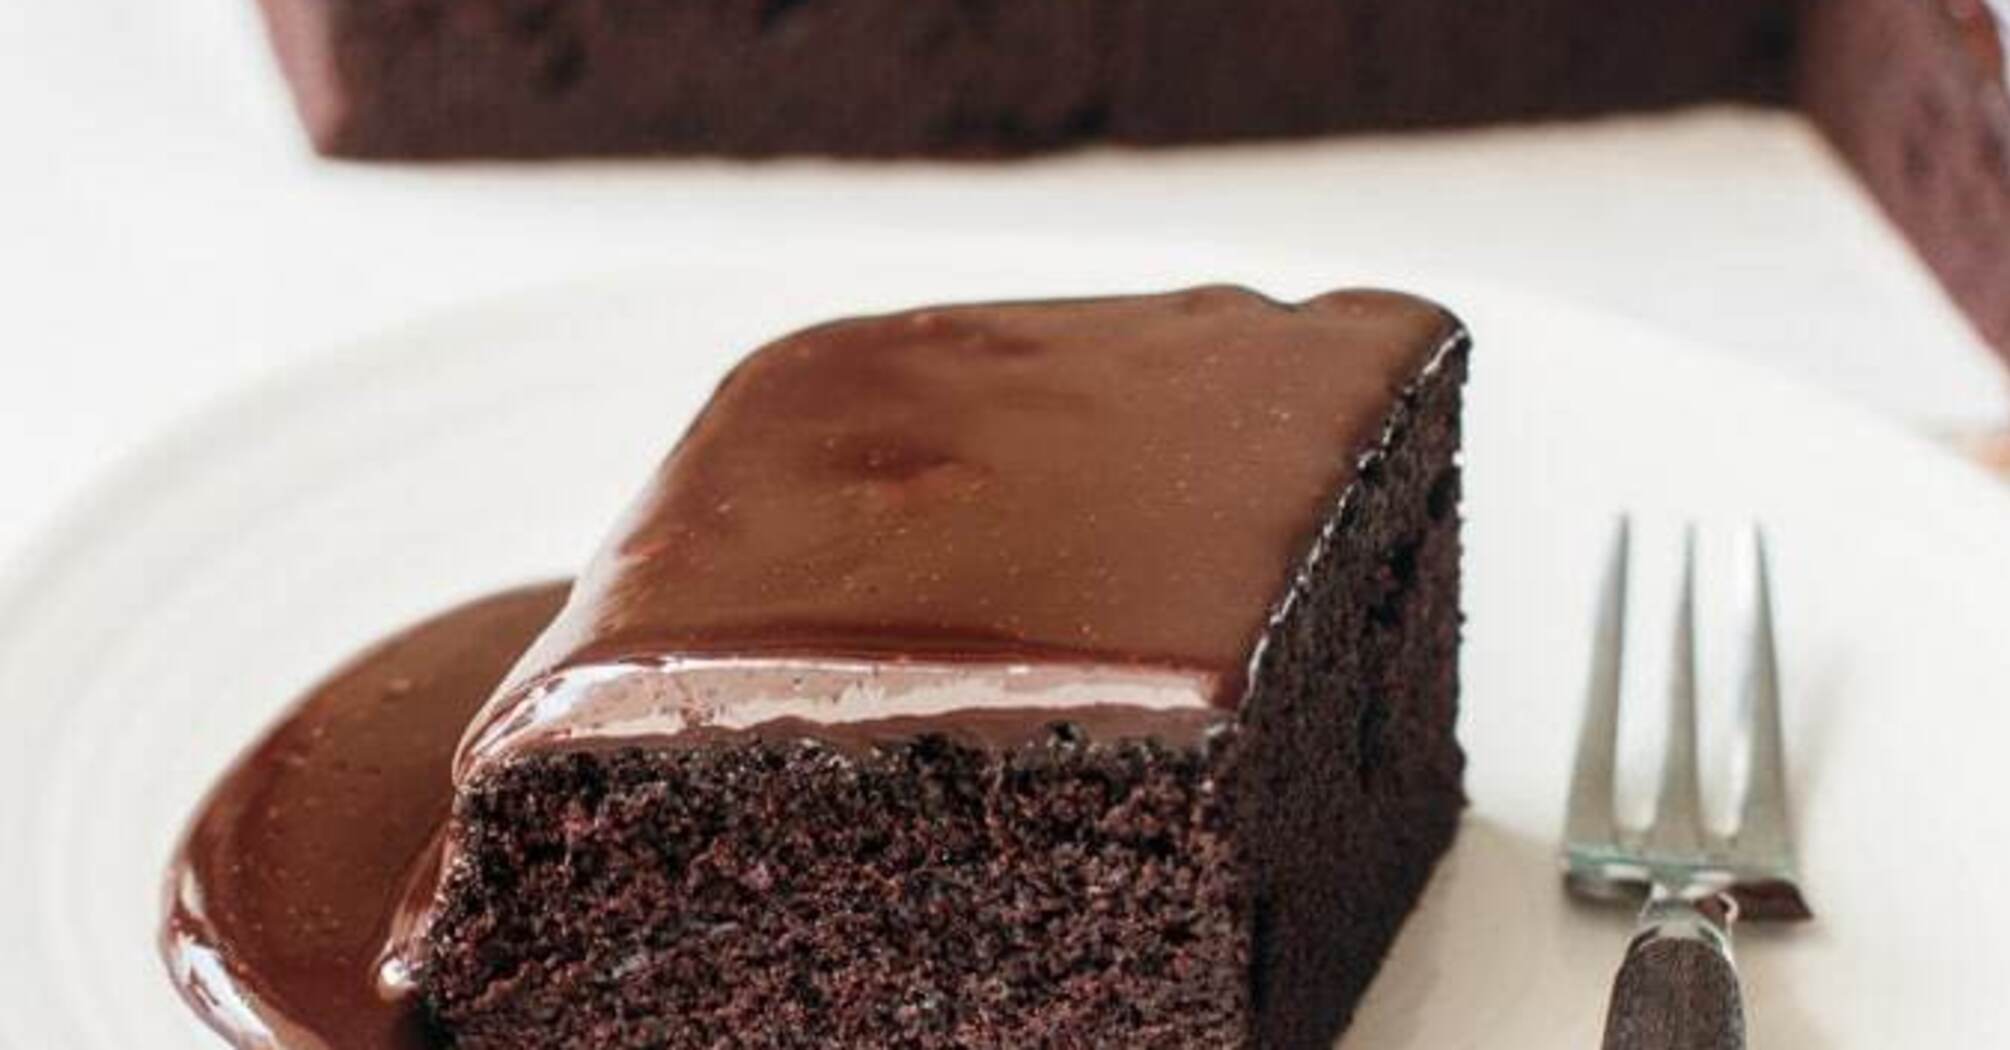 Chocolate cake that cooks in 10 minutes: an elementary dessert for tea